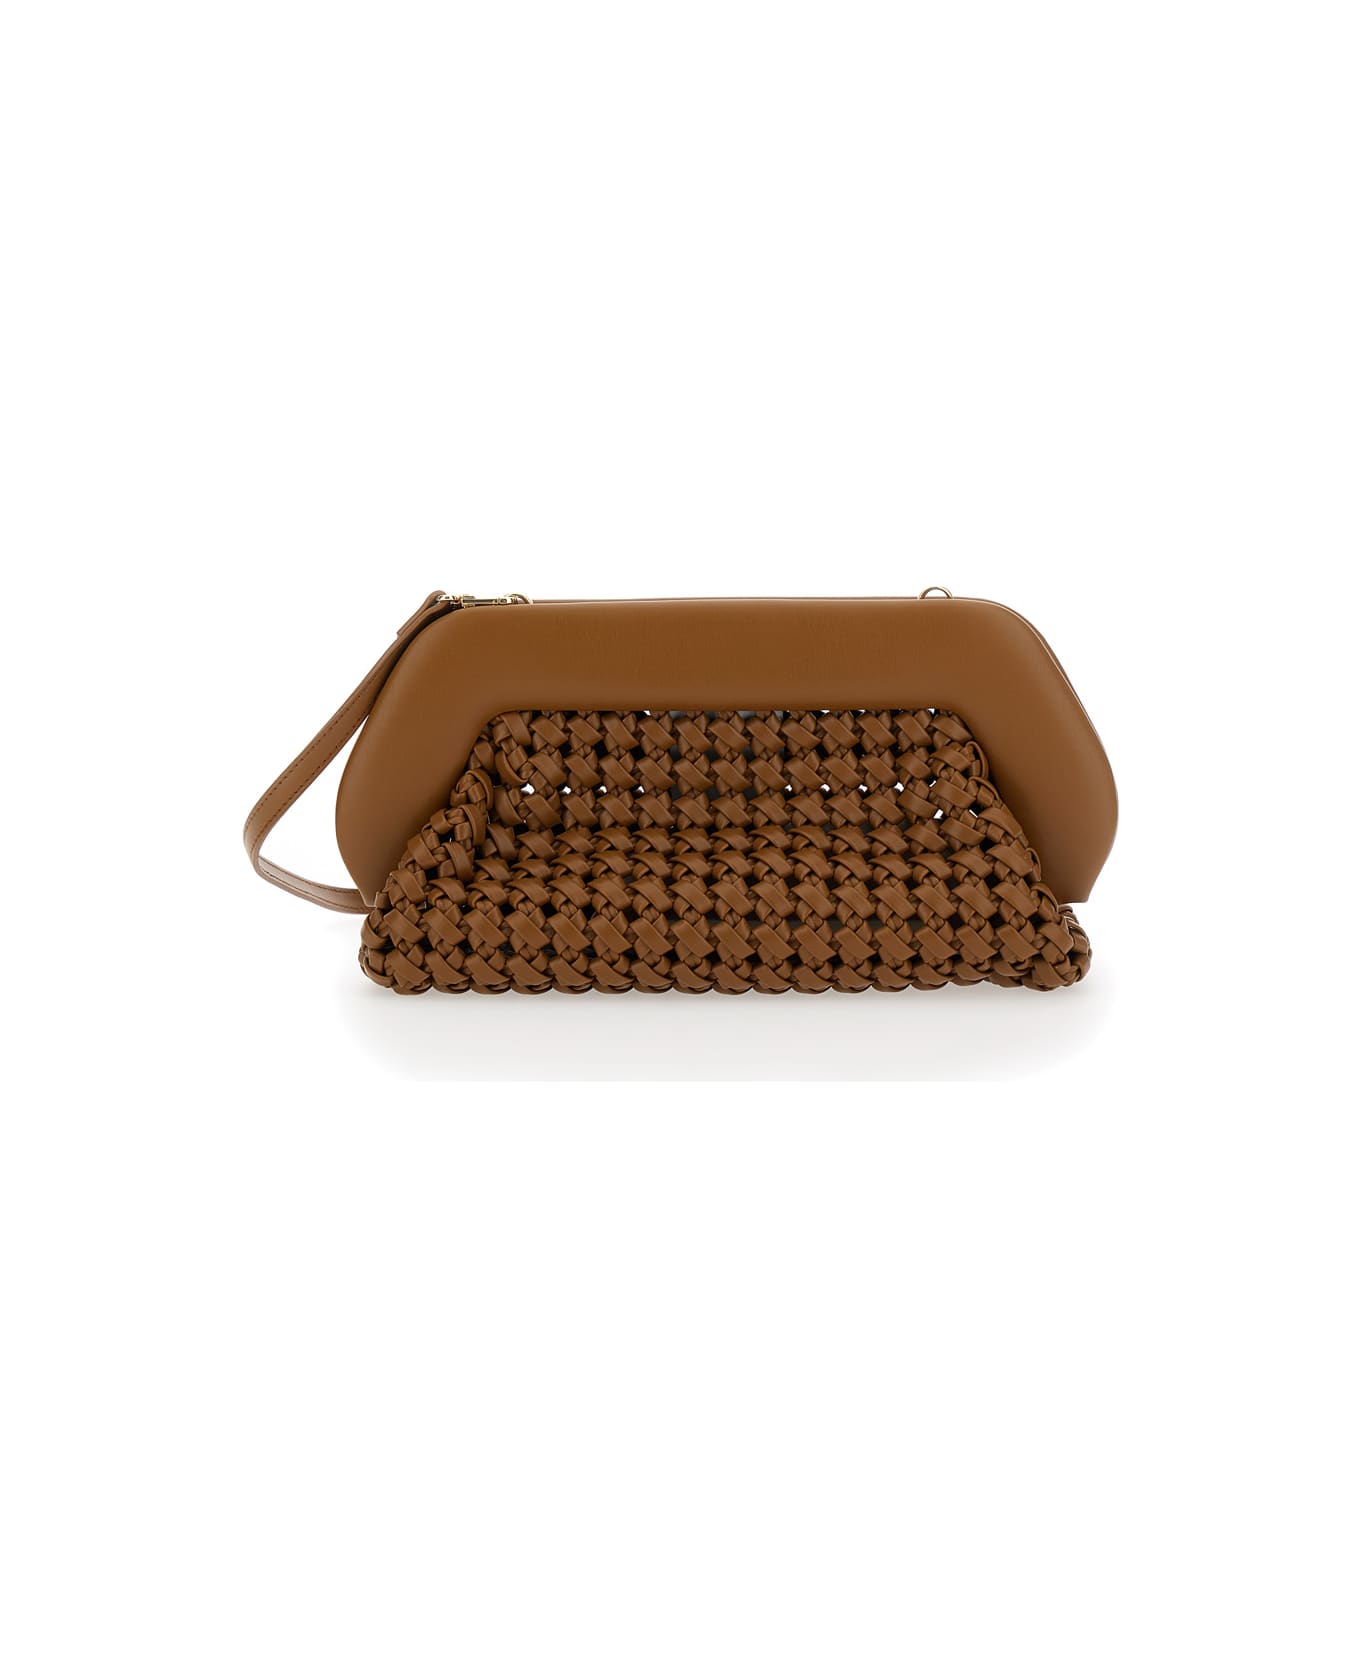 THEMOIRè 'bios Knots' Brown Clutch Bag With Braided Design In Eco Leather Woman - Brown